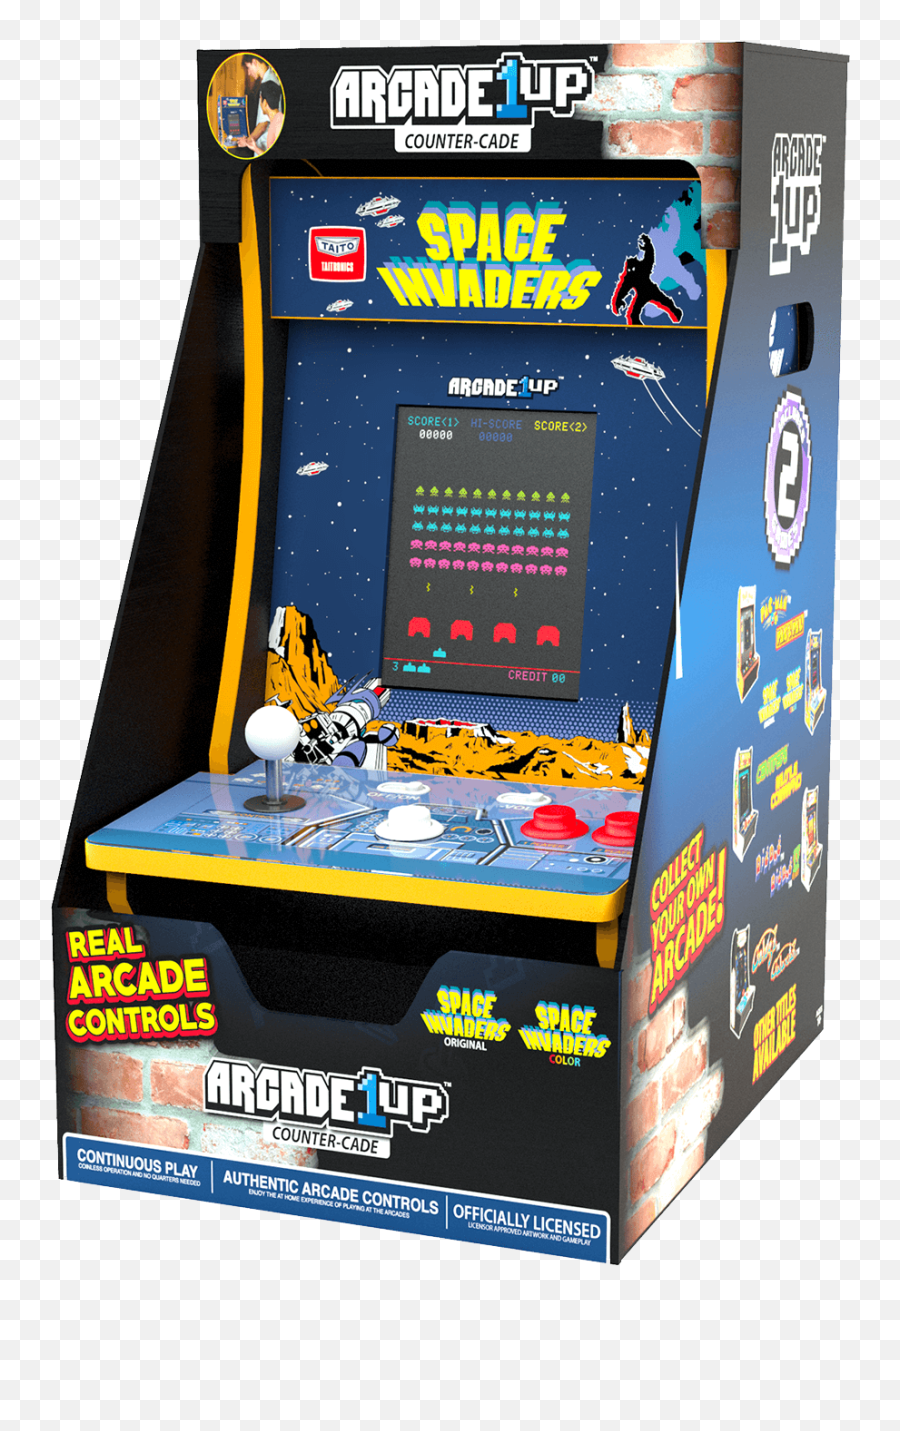 Should I Buy An Arcade 1up Machine Tomu0027s Guide - Arcade1up Countercade Space Invaders Png,Arcade Machine Png